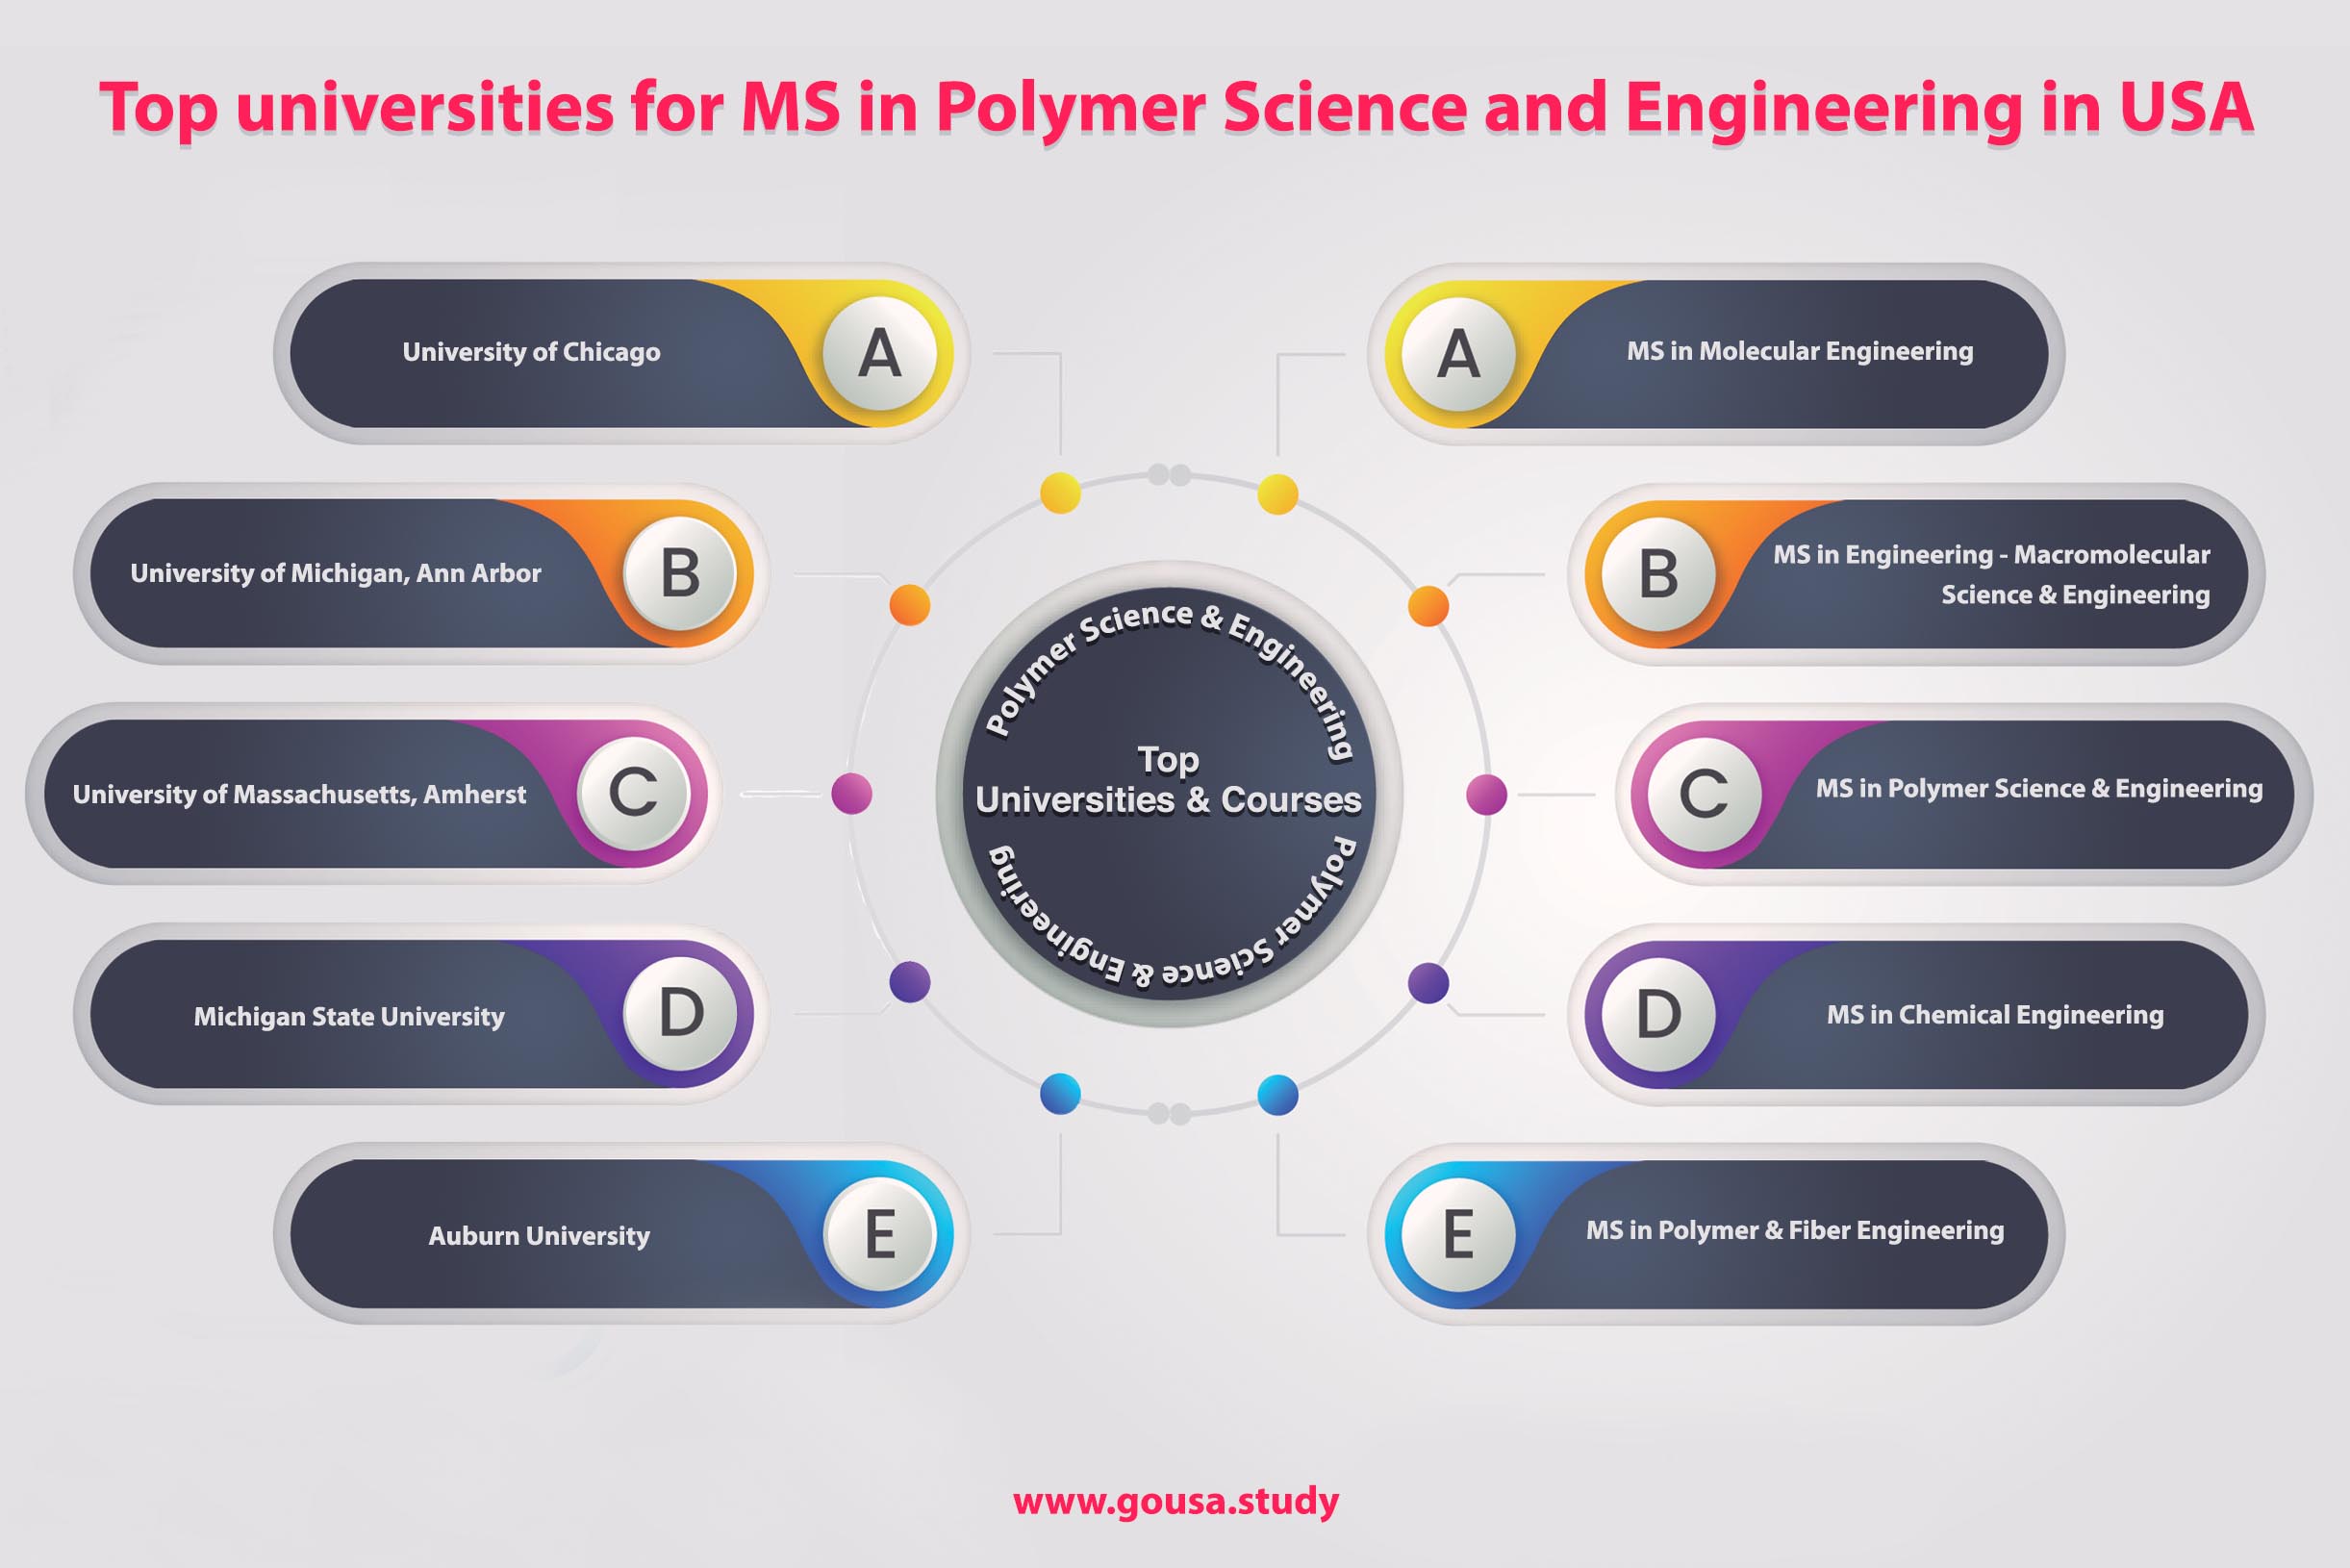 Top Universities for MS in Polymer Science and Engineering in USA